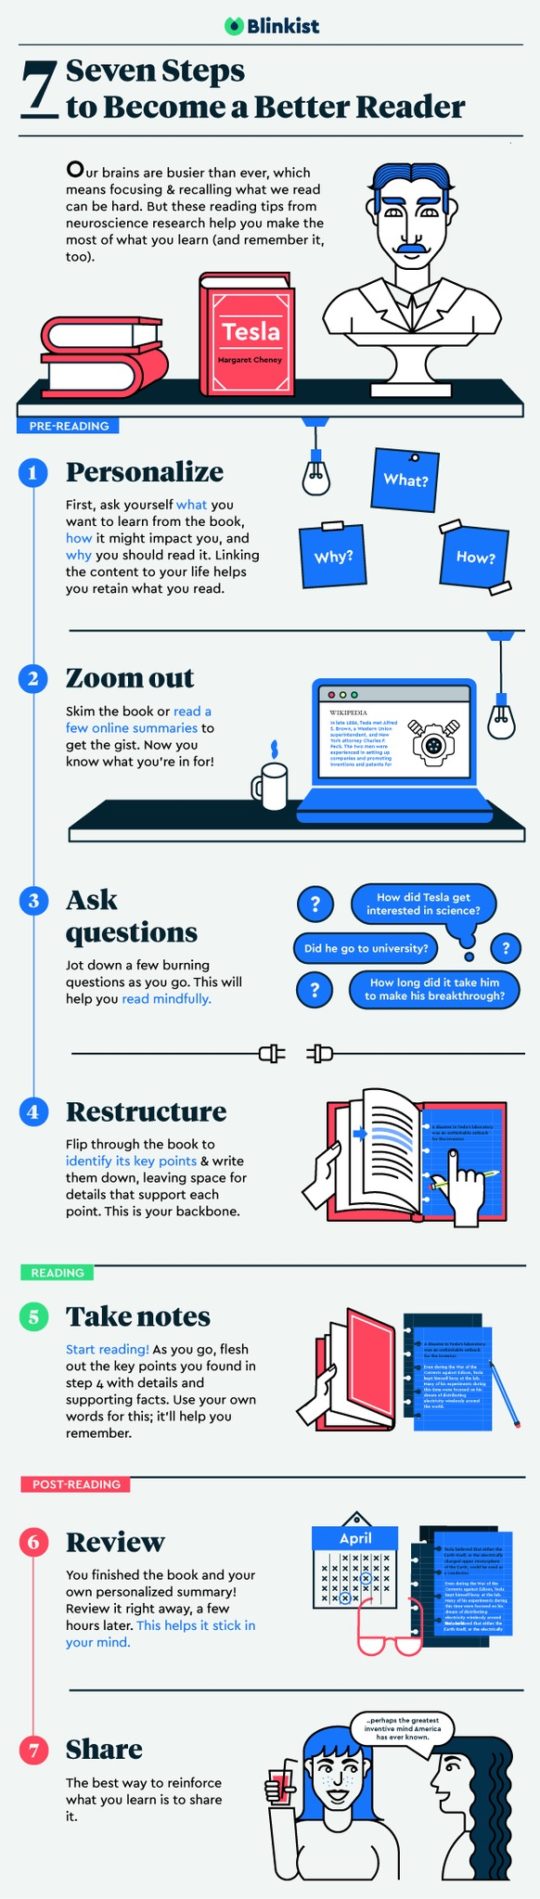 Seven steps to get the most out of your reading #infographic